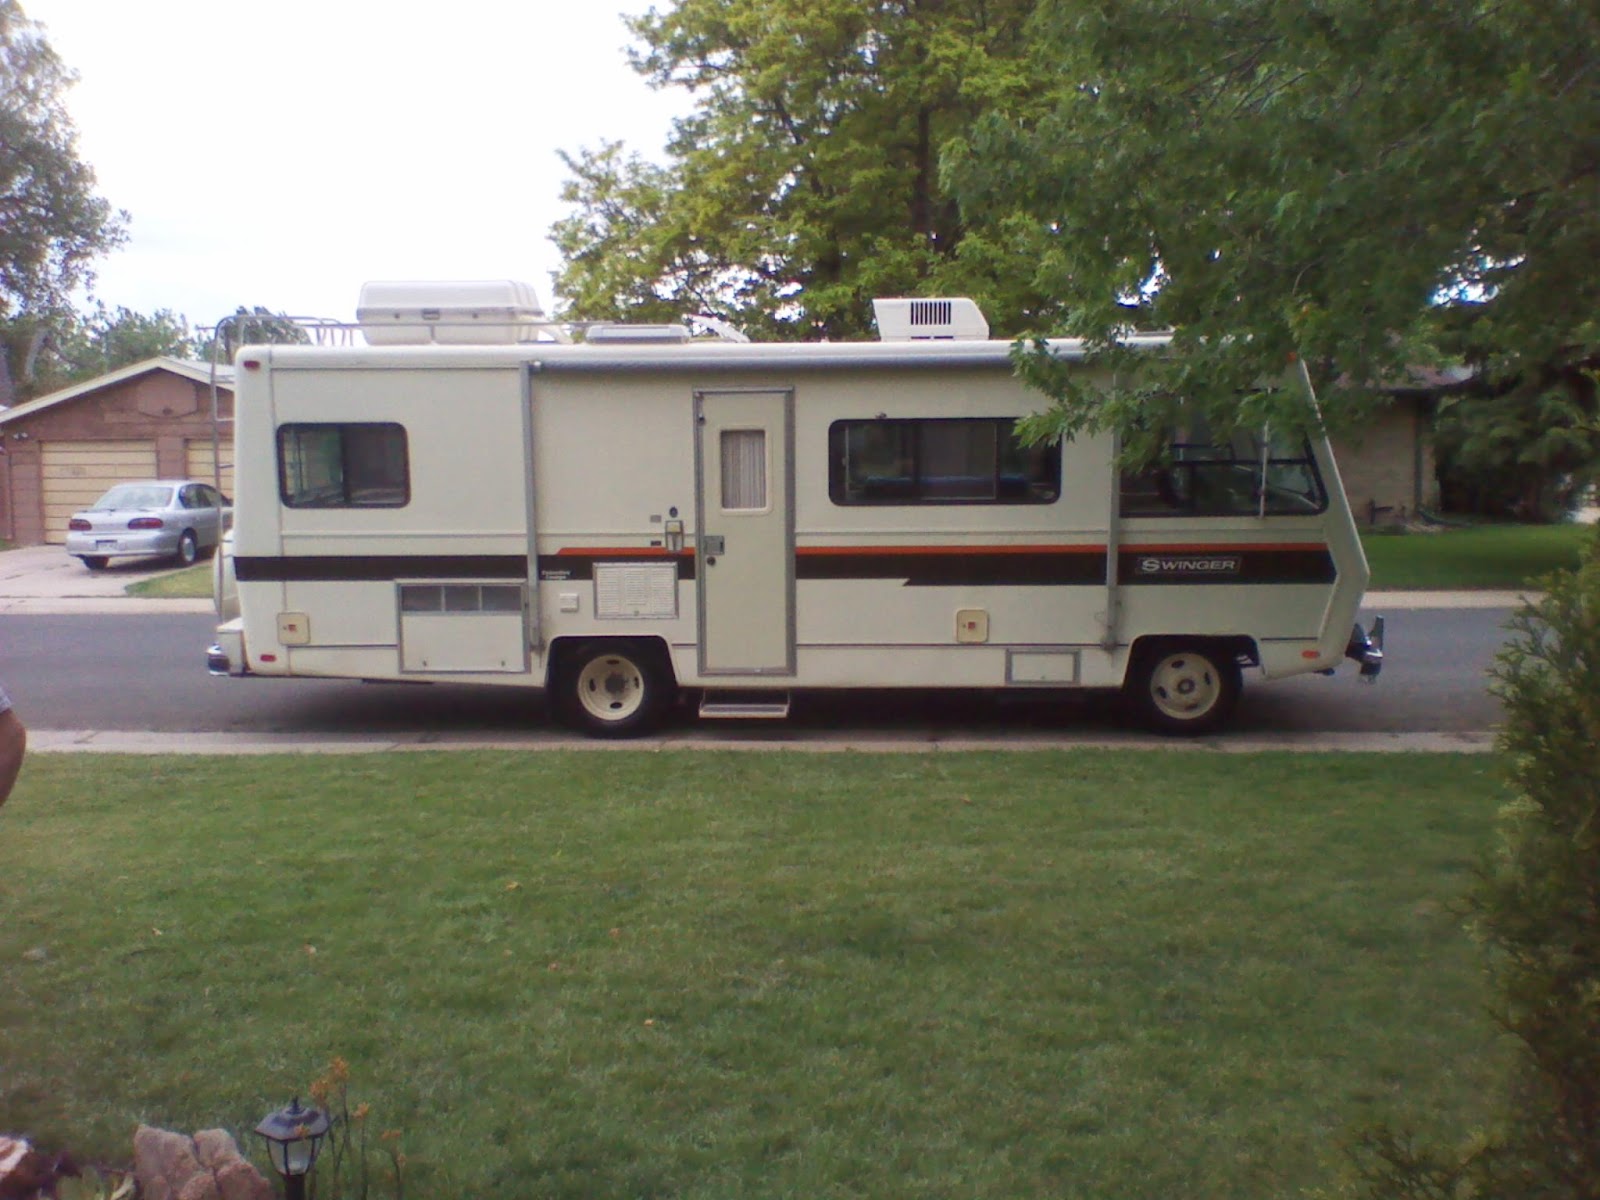 My Vintage 1978 Georgie Boy Swinger Executive Lounge Motorhome Welcome to yet another one of my Motorhomes, my 1978 Swinger Executive Lounge Motorhome manufactured by Georgie Boy Industries photo